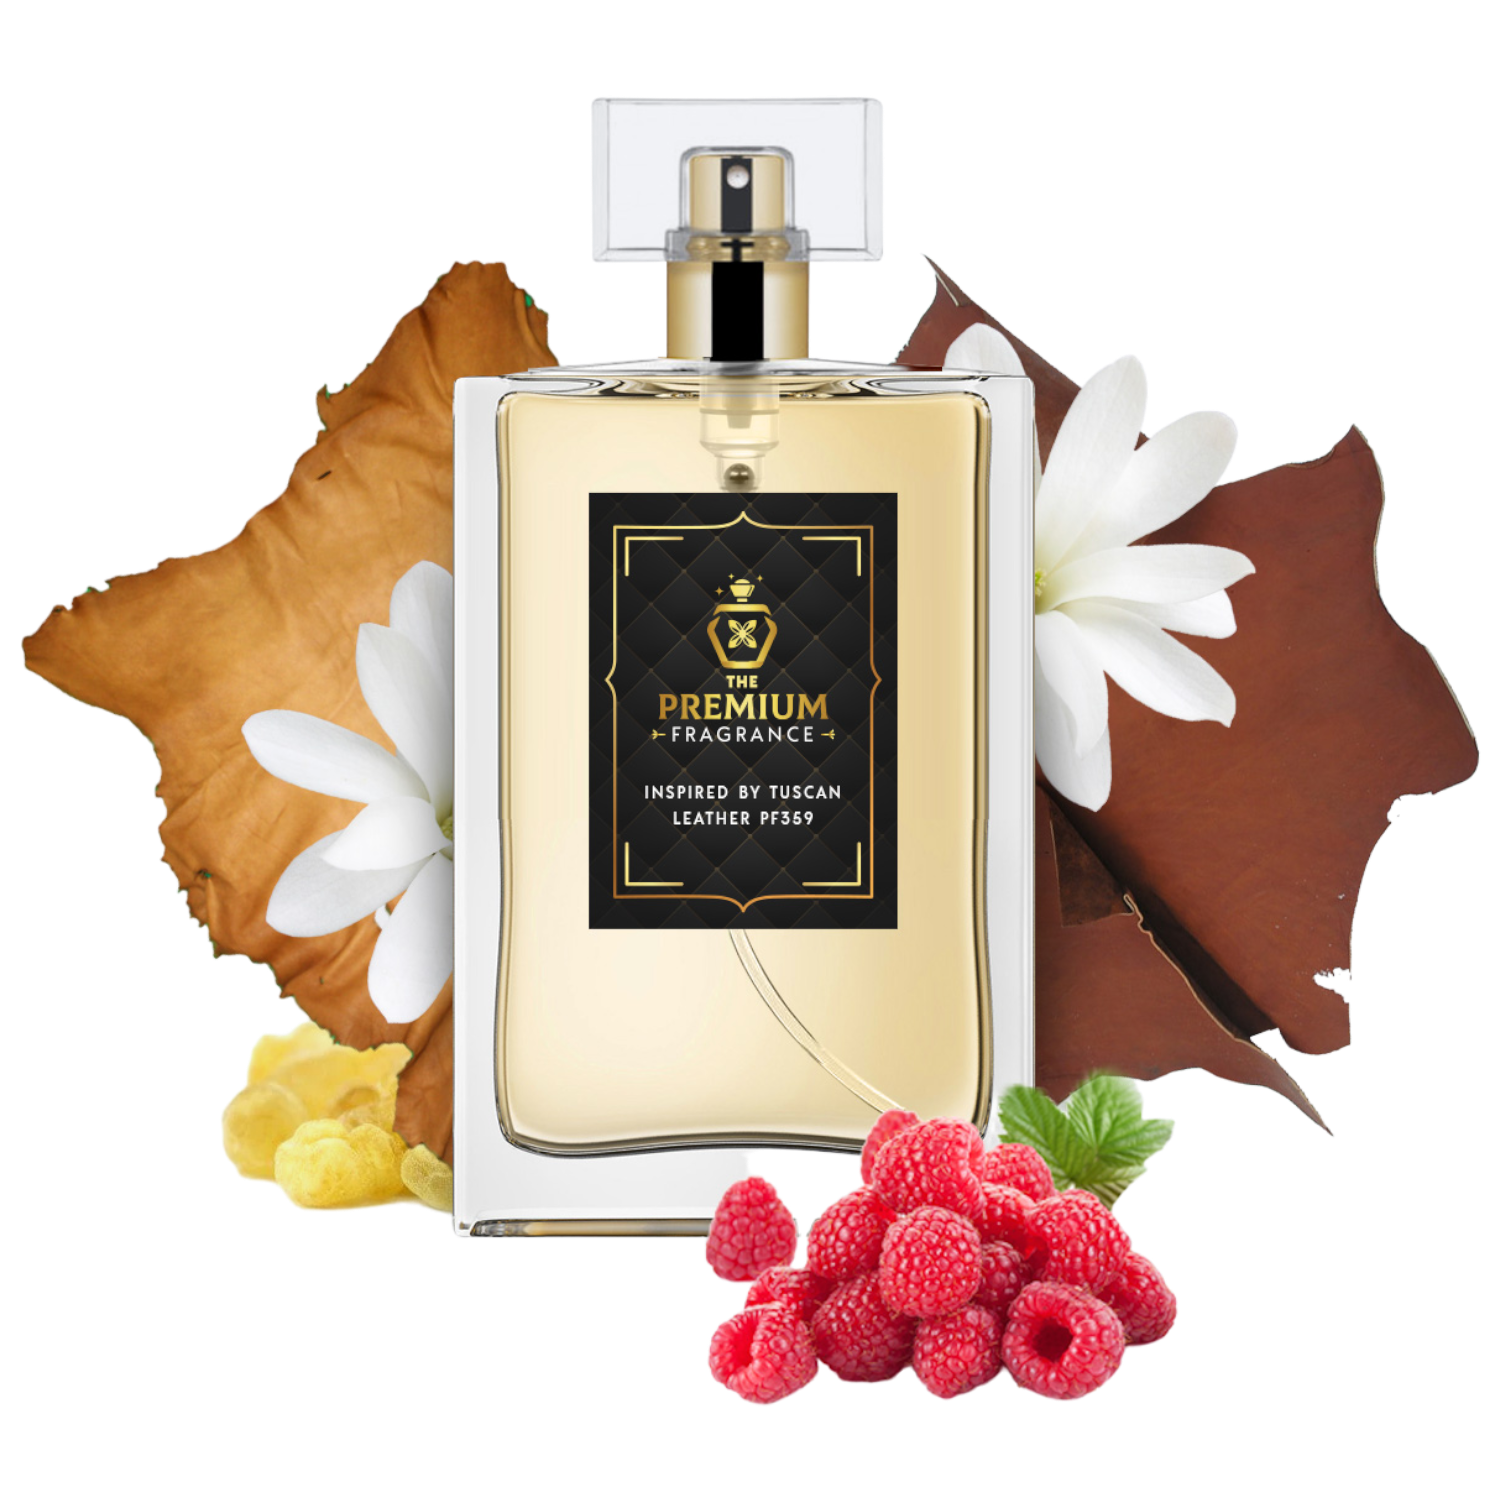 Inspired By, Dupe, Copy and smell a like Tuscan Leather Perfume - The Premium Fragrance